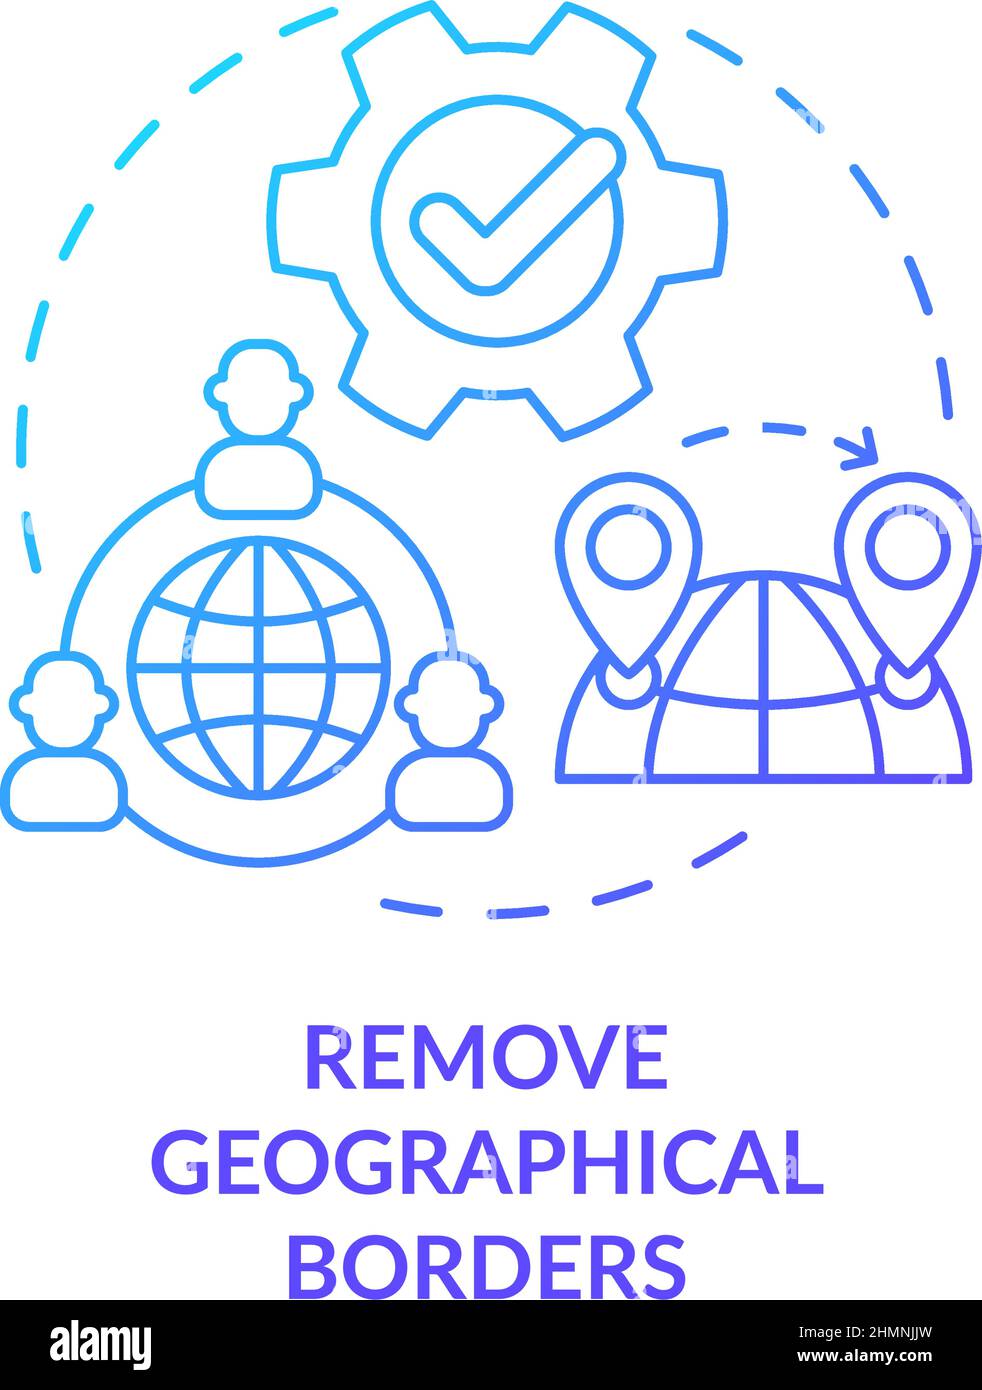 Remove geographical borders blue gradient concept icon Stock Vector